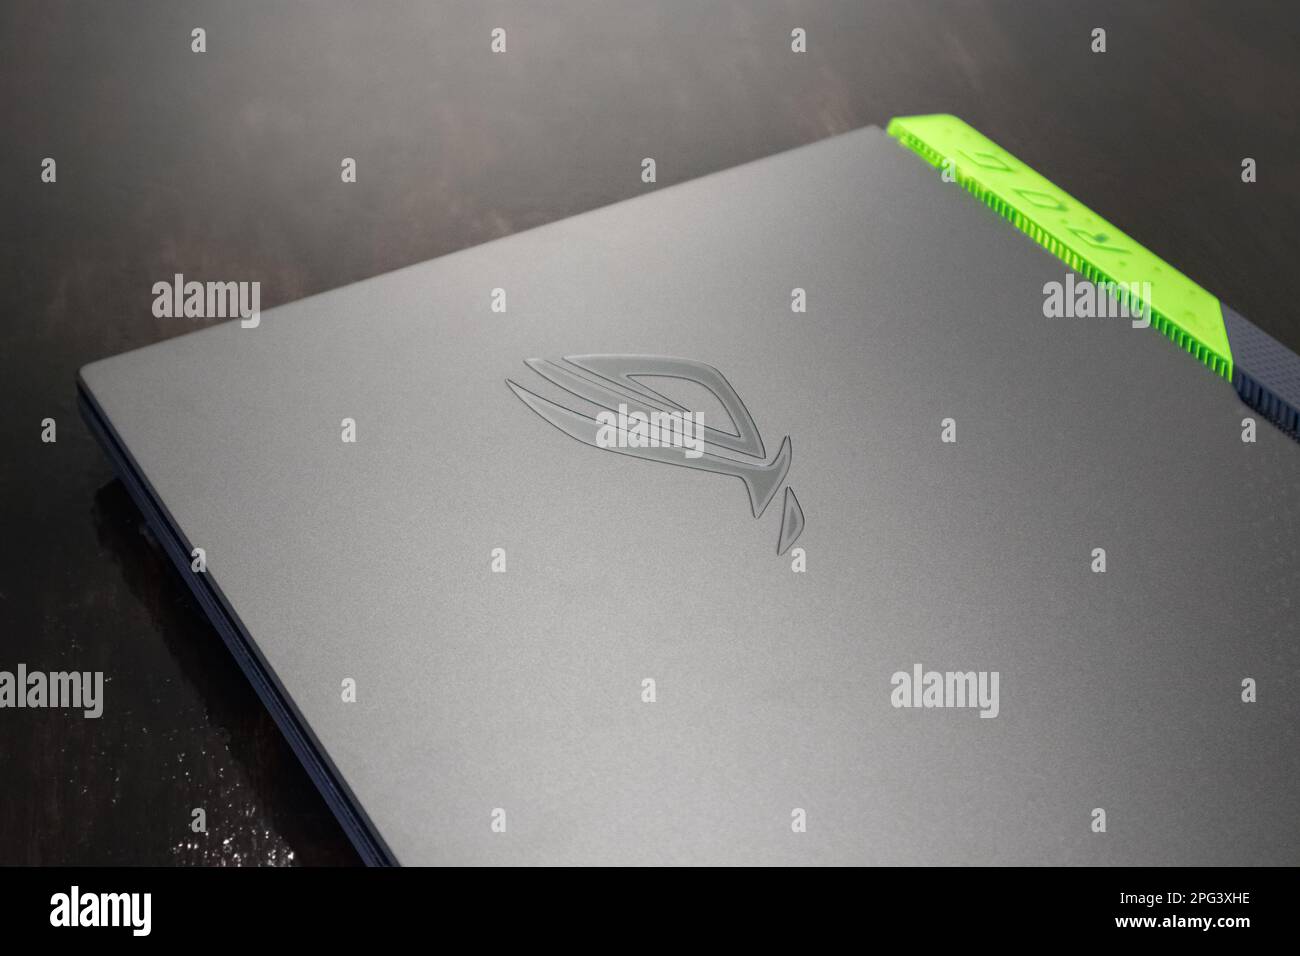 Kiev, Ukraine - August 28, 2022: ROG Strix G17 (Republic of Gamers) Gaming Laptop by ASUS close-up on table. Gaming grey notebook on black. Tech, IT, Stock Photo